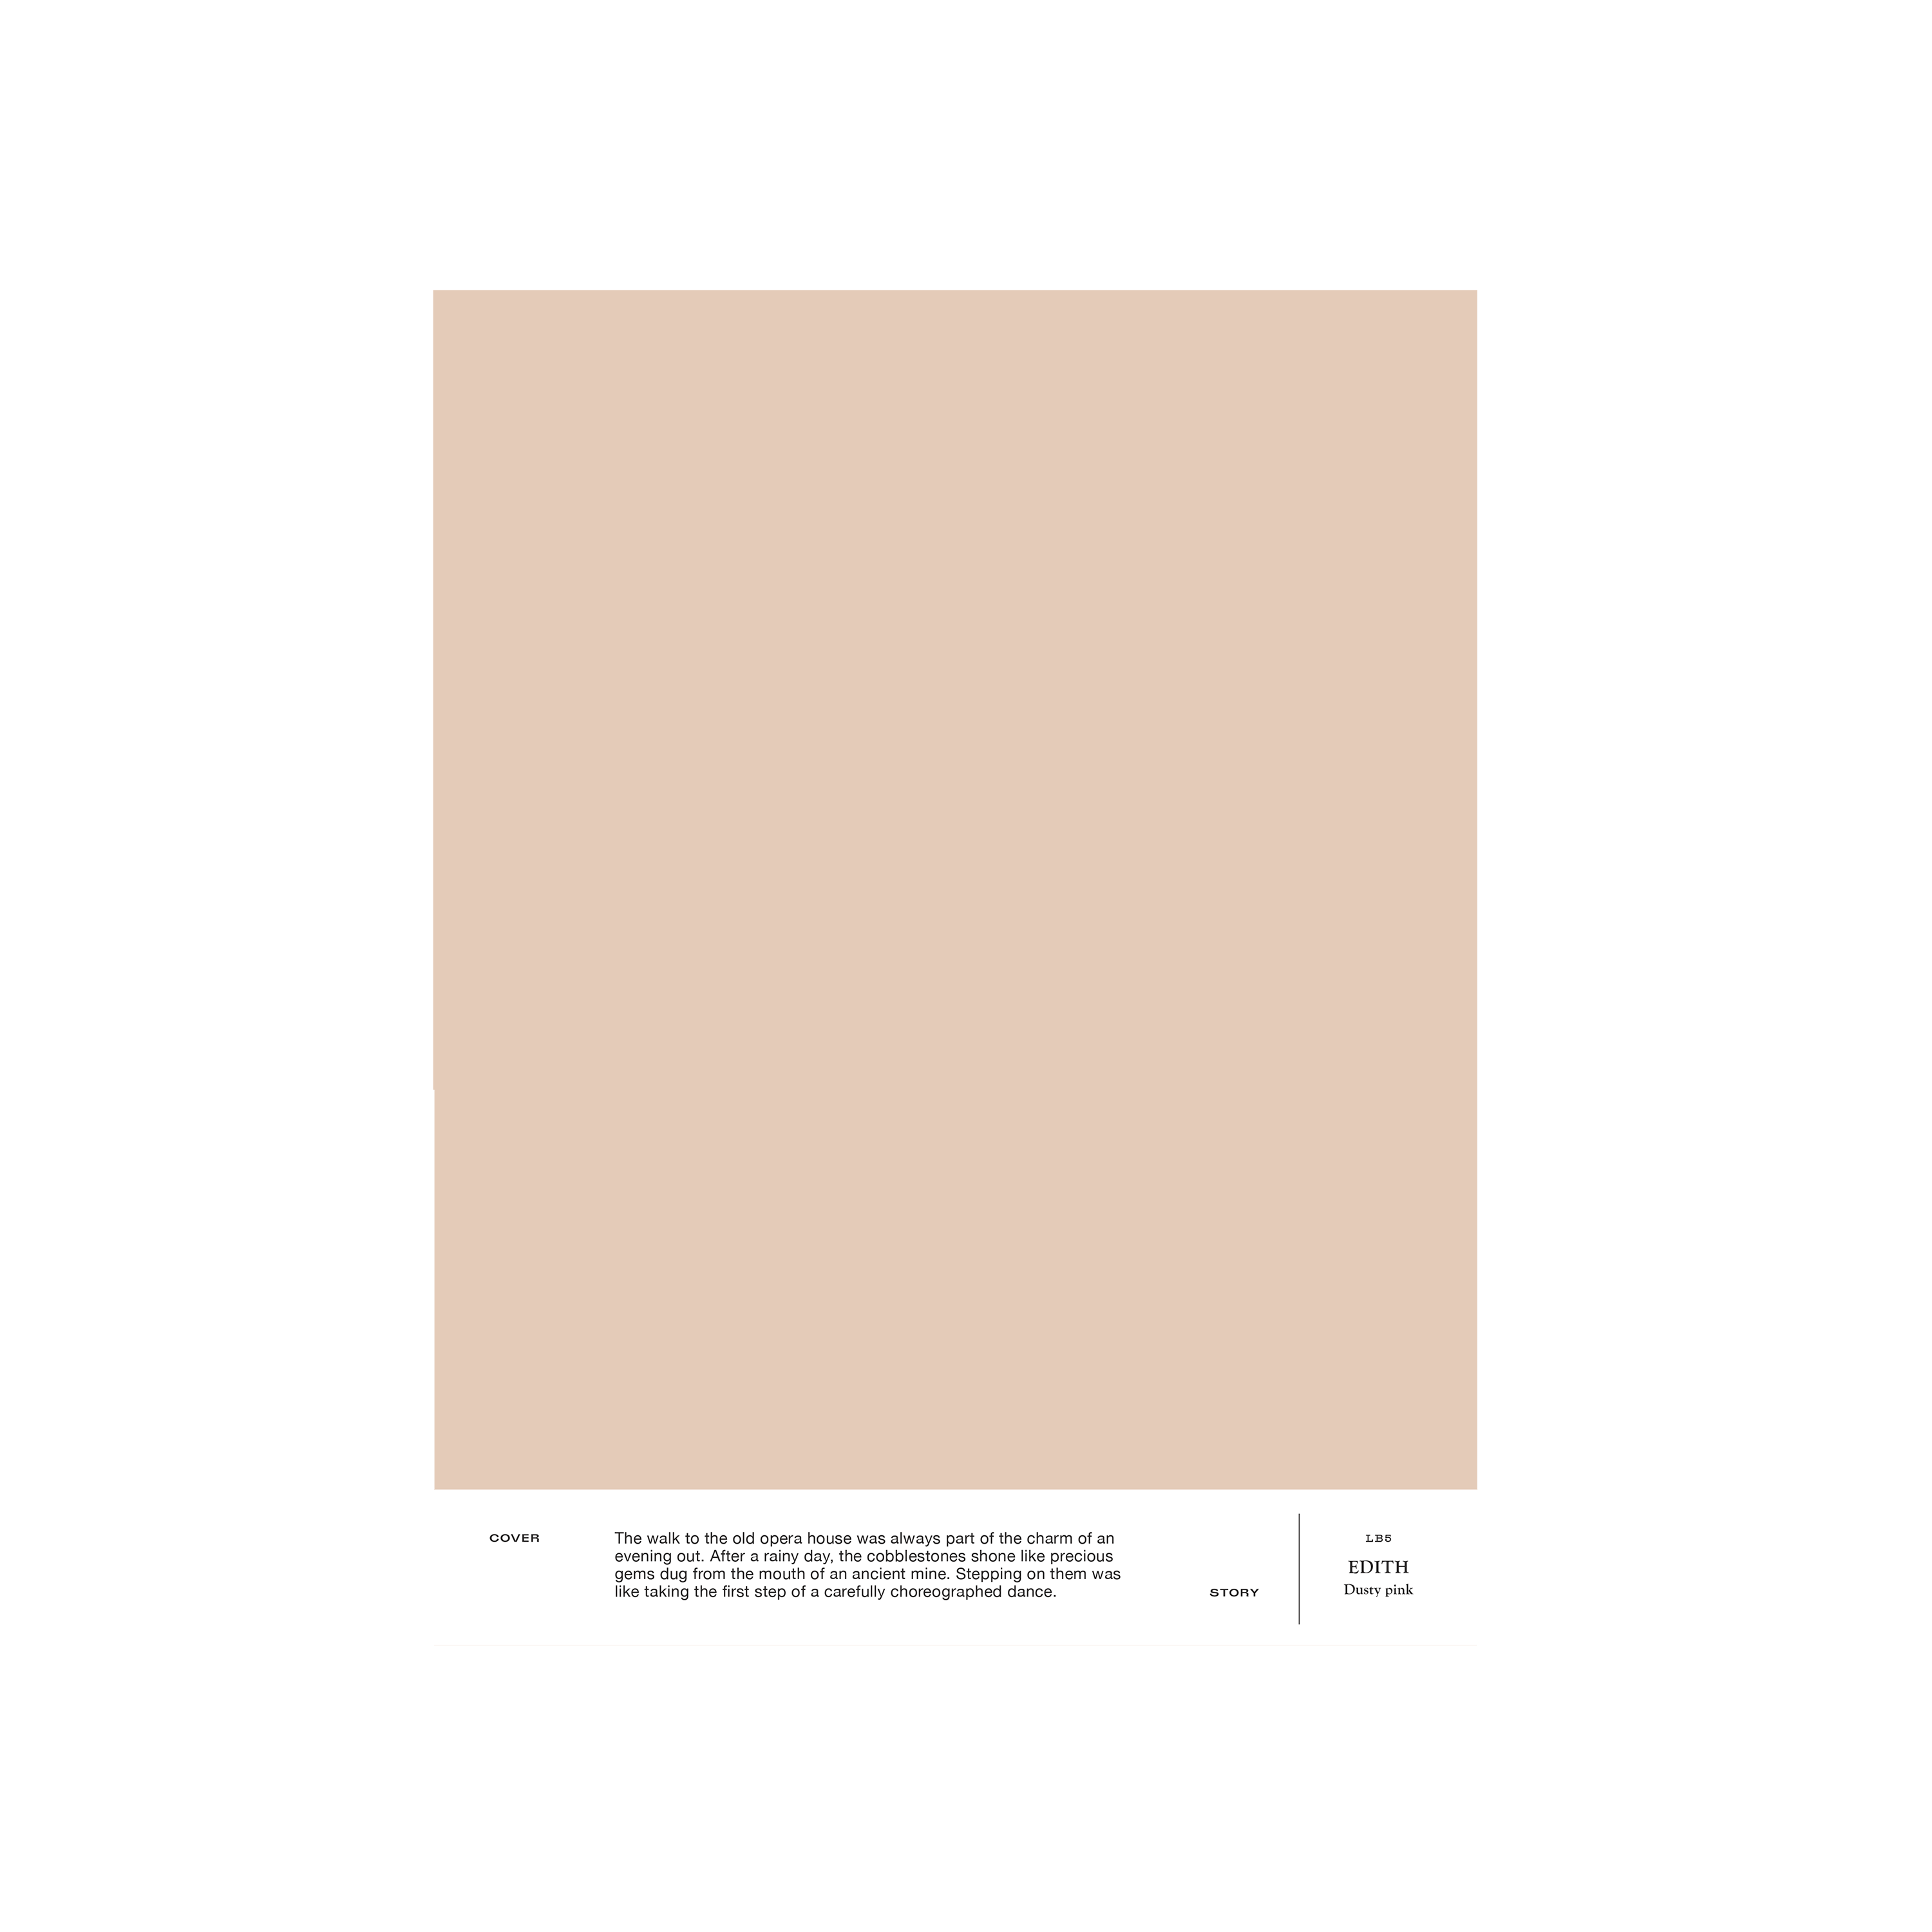 Dusty pink interior paint Cover Story LB5 EDITH